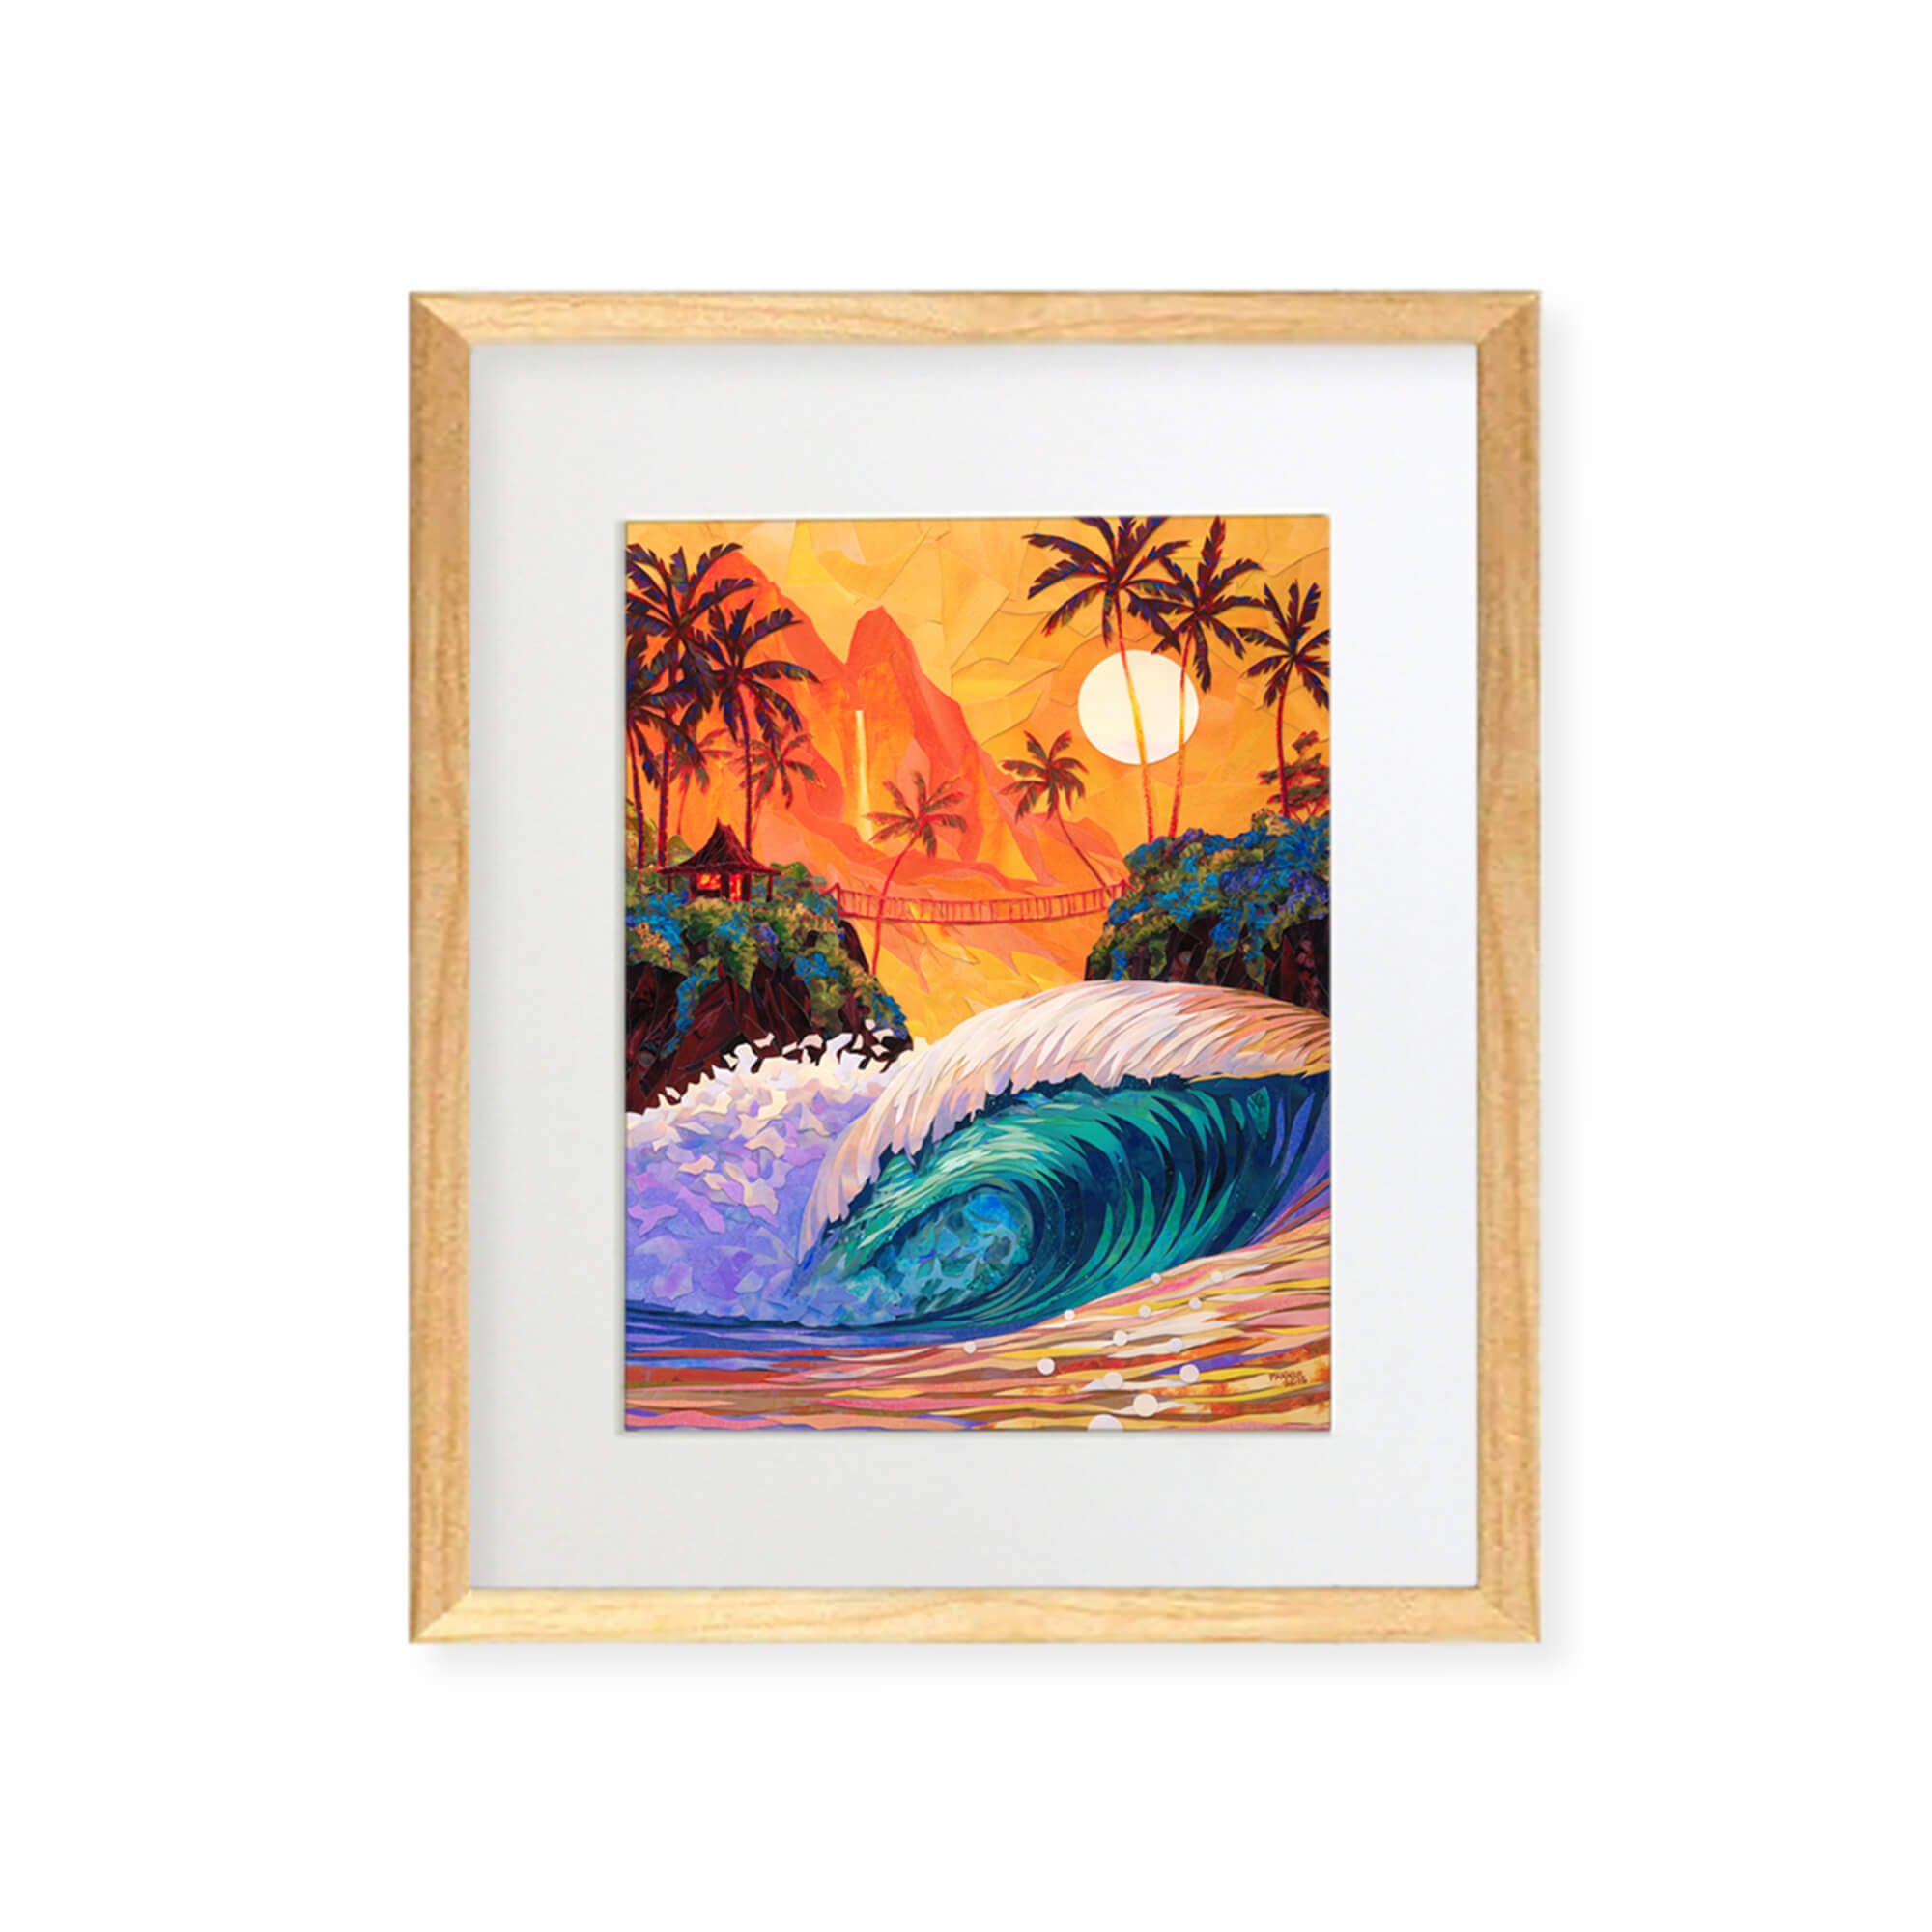 A framed matted art print featuring a collage of a vibrant sunset with teal-hued crashing waves, palm trees, and a mountain and waterfall background by Hawaii artist Patrick Parker